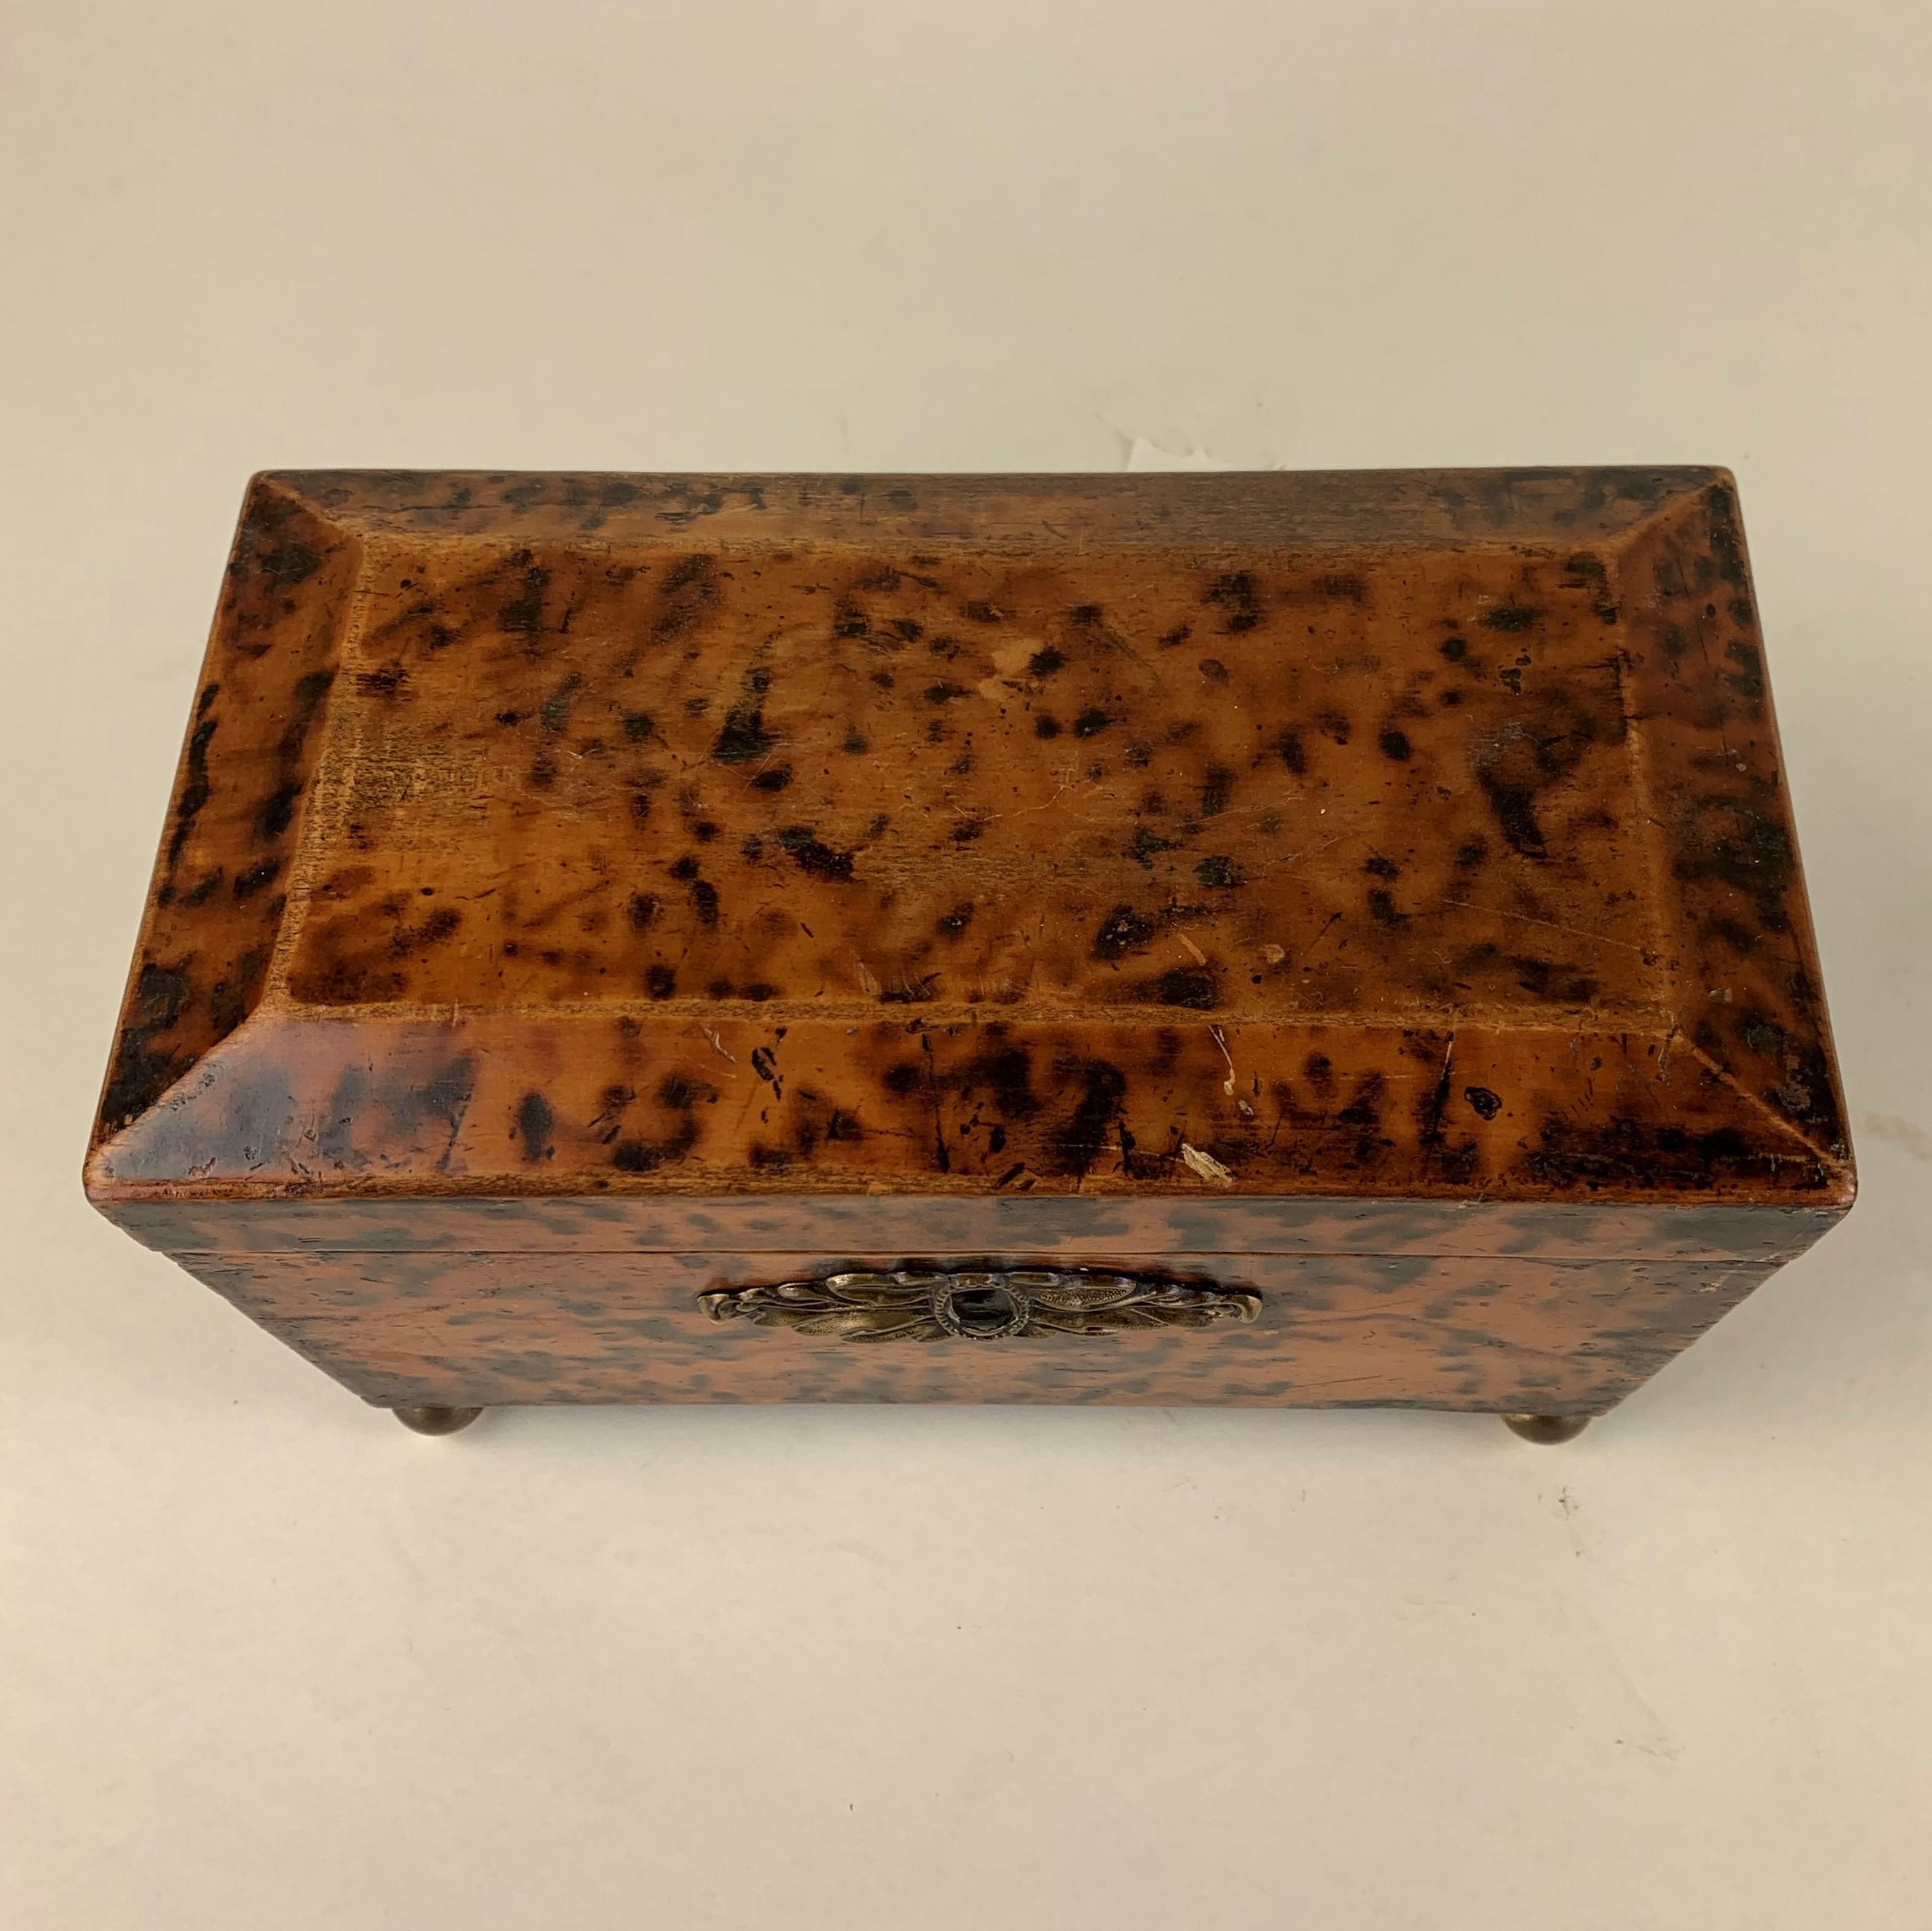 Unusual early 19th century simulated tortoiseshell two compartment rectangular tea caddy with cushion shaped lid and retaining the original inner lids. In reasonable condition for its age with only slight signs of wear and use.